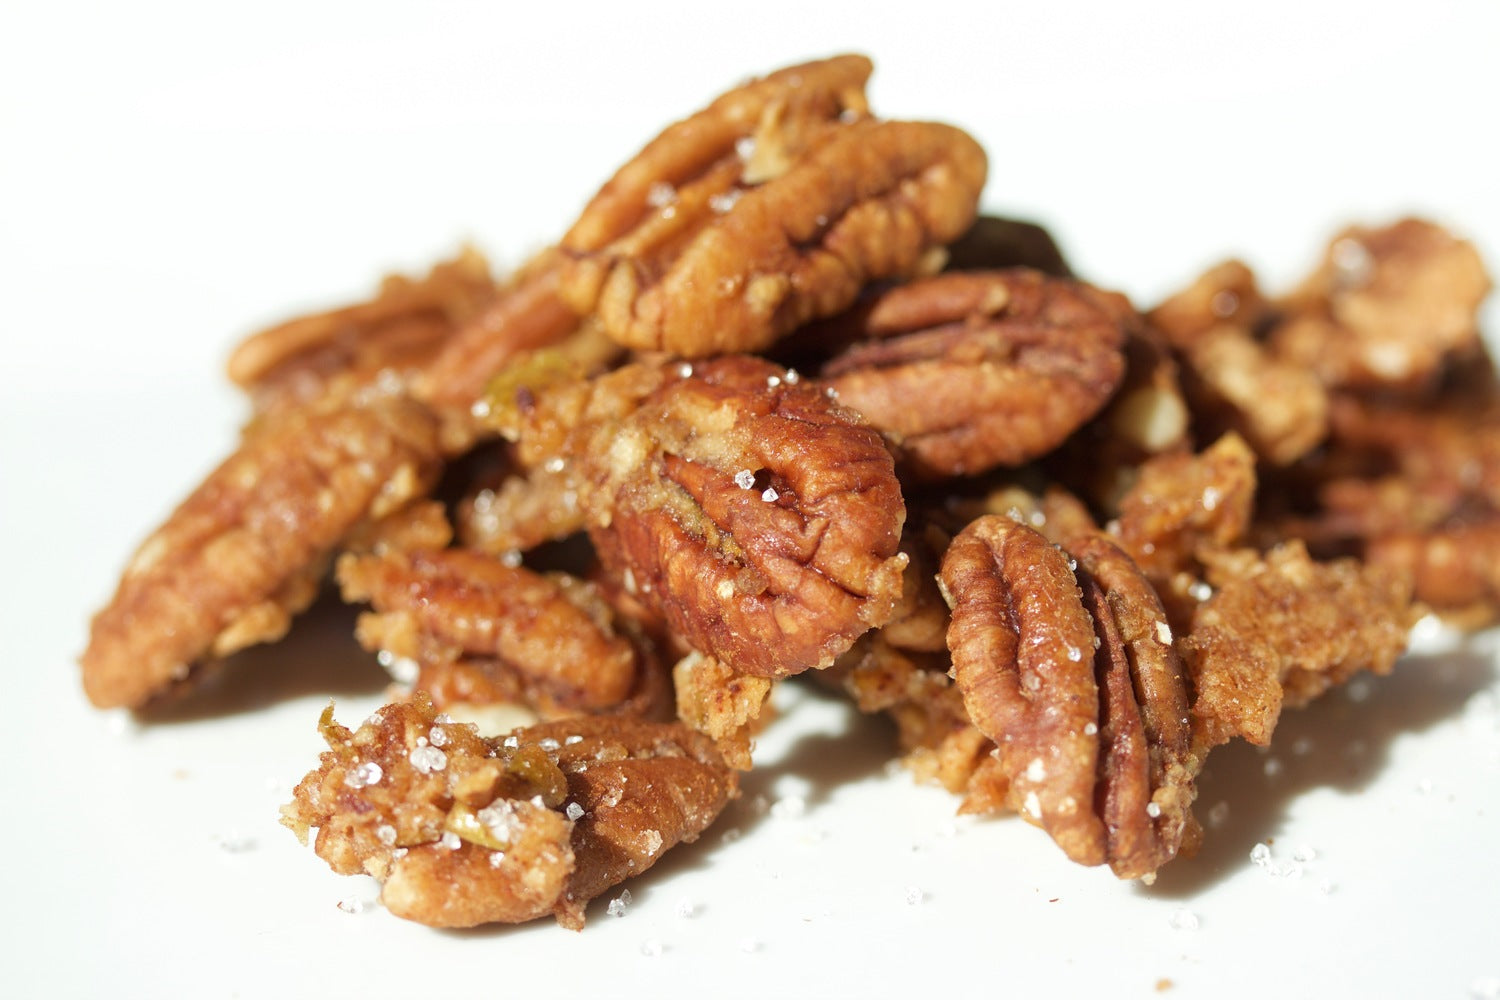 Brother's Nuts - Sweet Apple Pecans